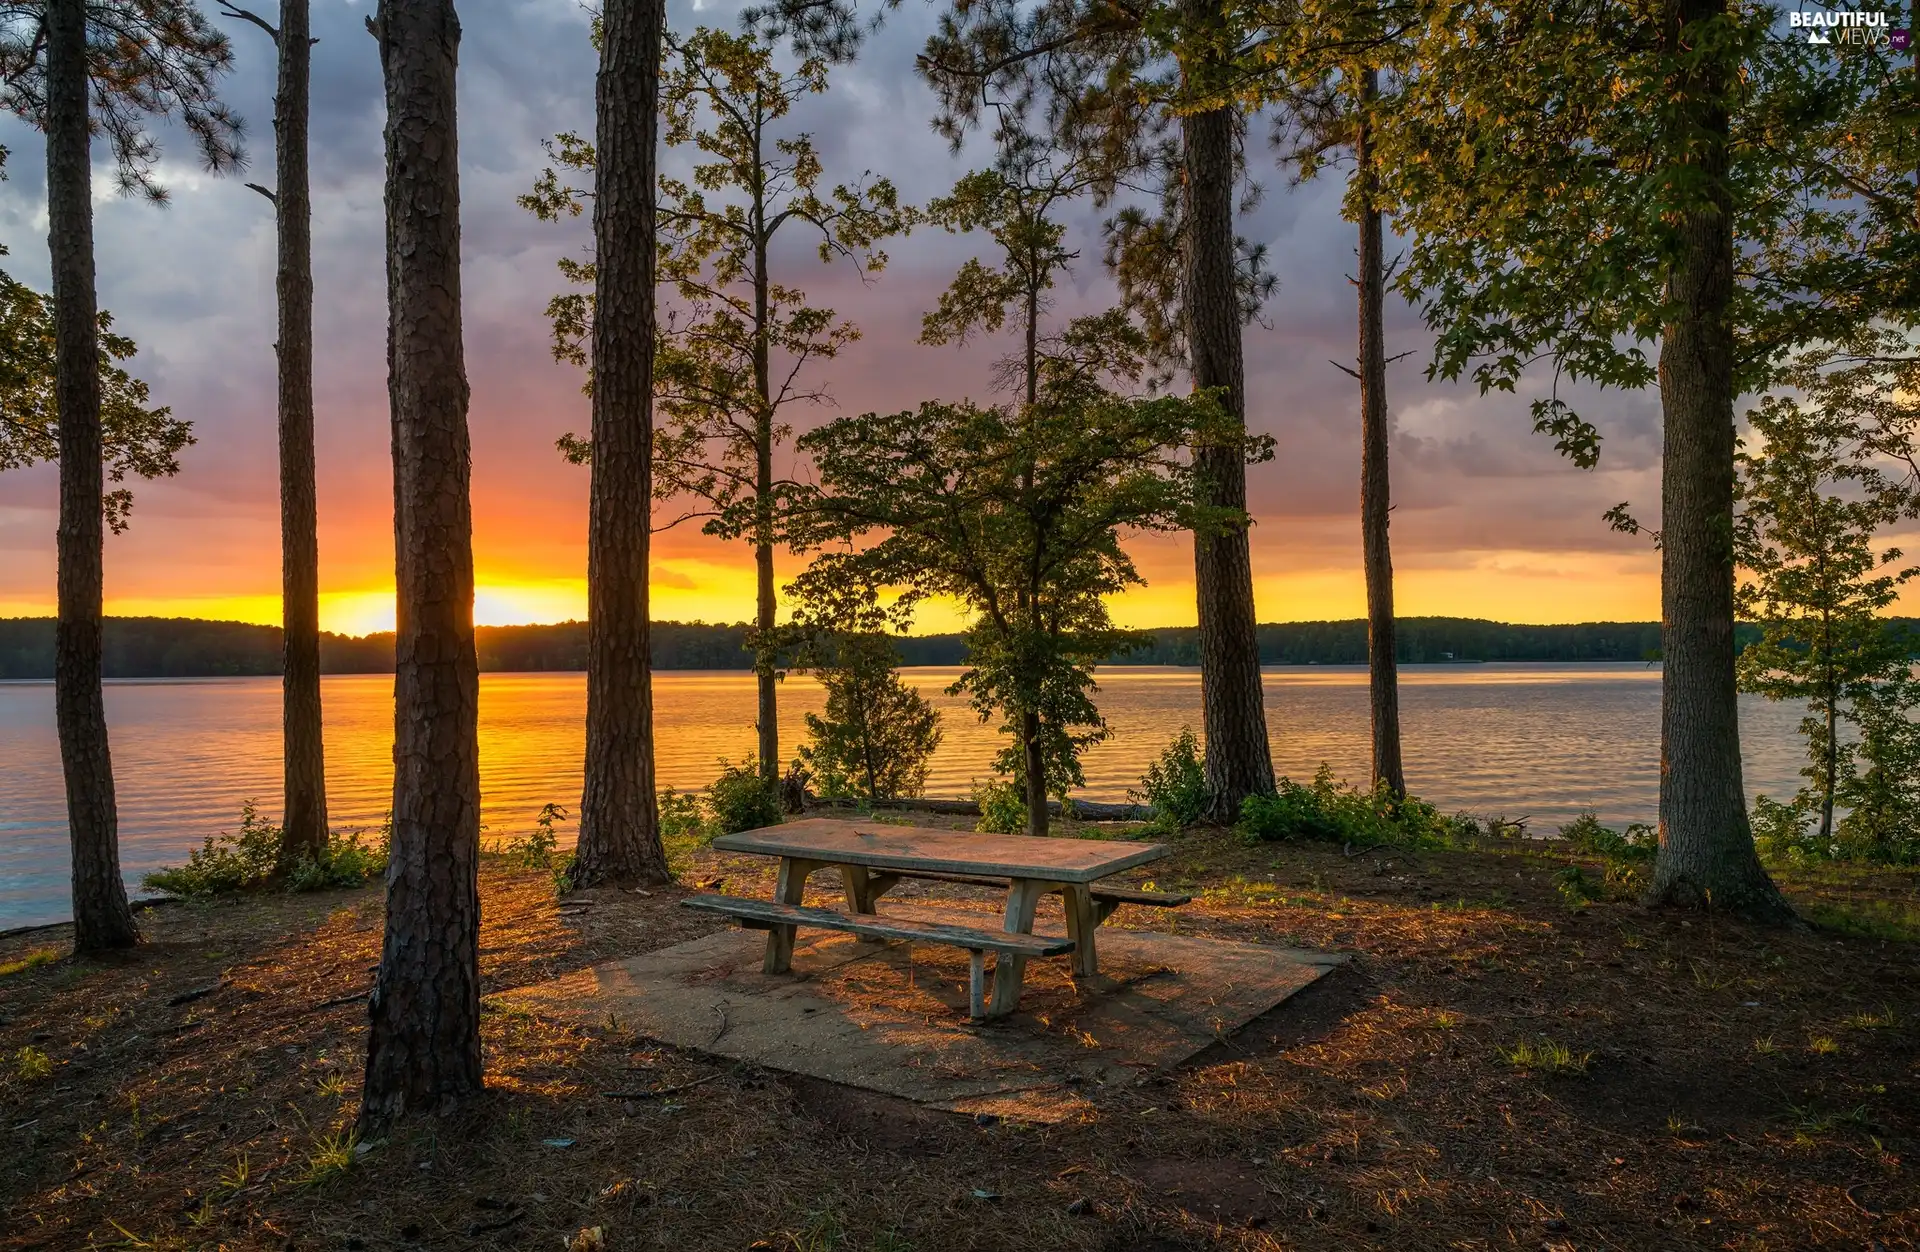 trees, State of Georgia, West Point Lake, Bench, The United States, viewes, Great Sunsets